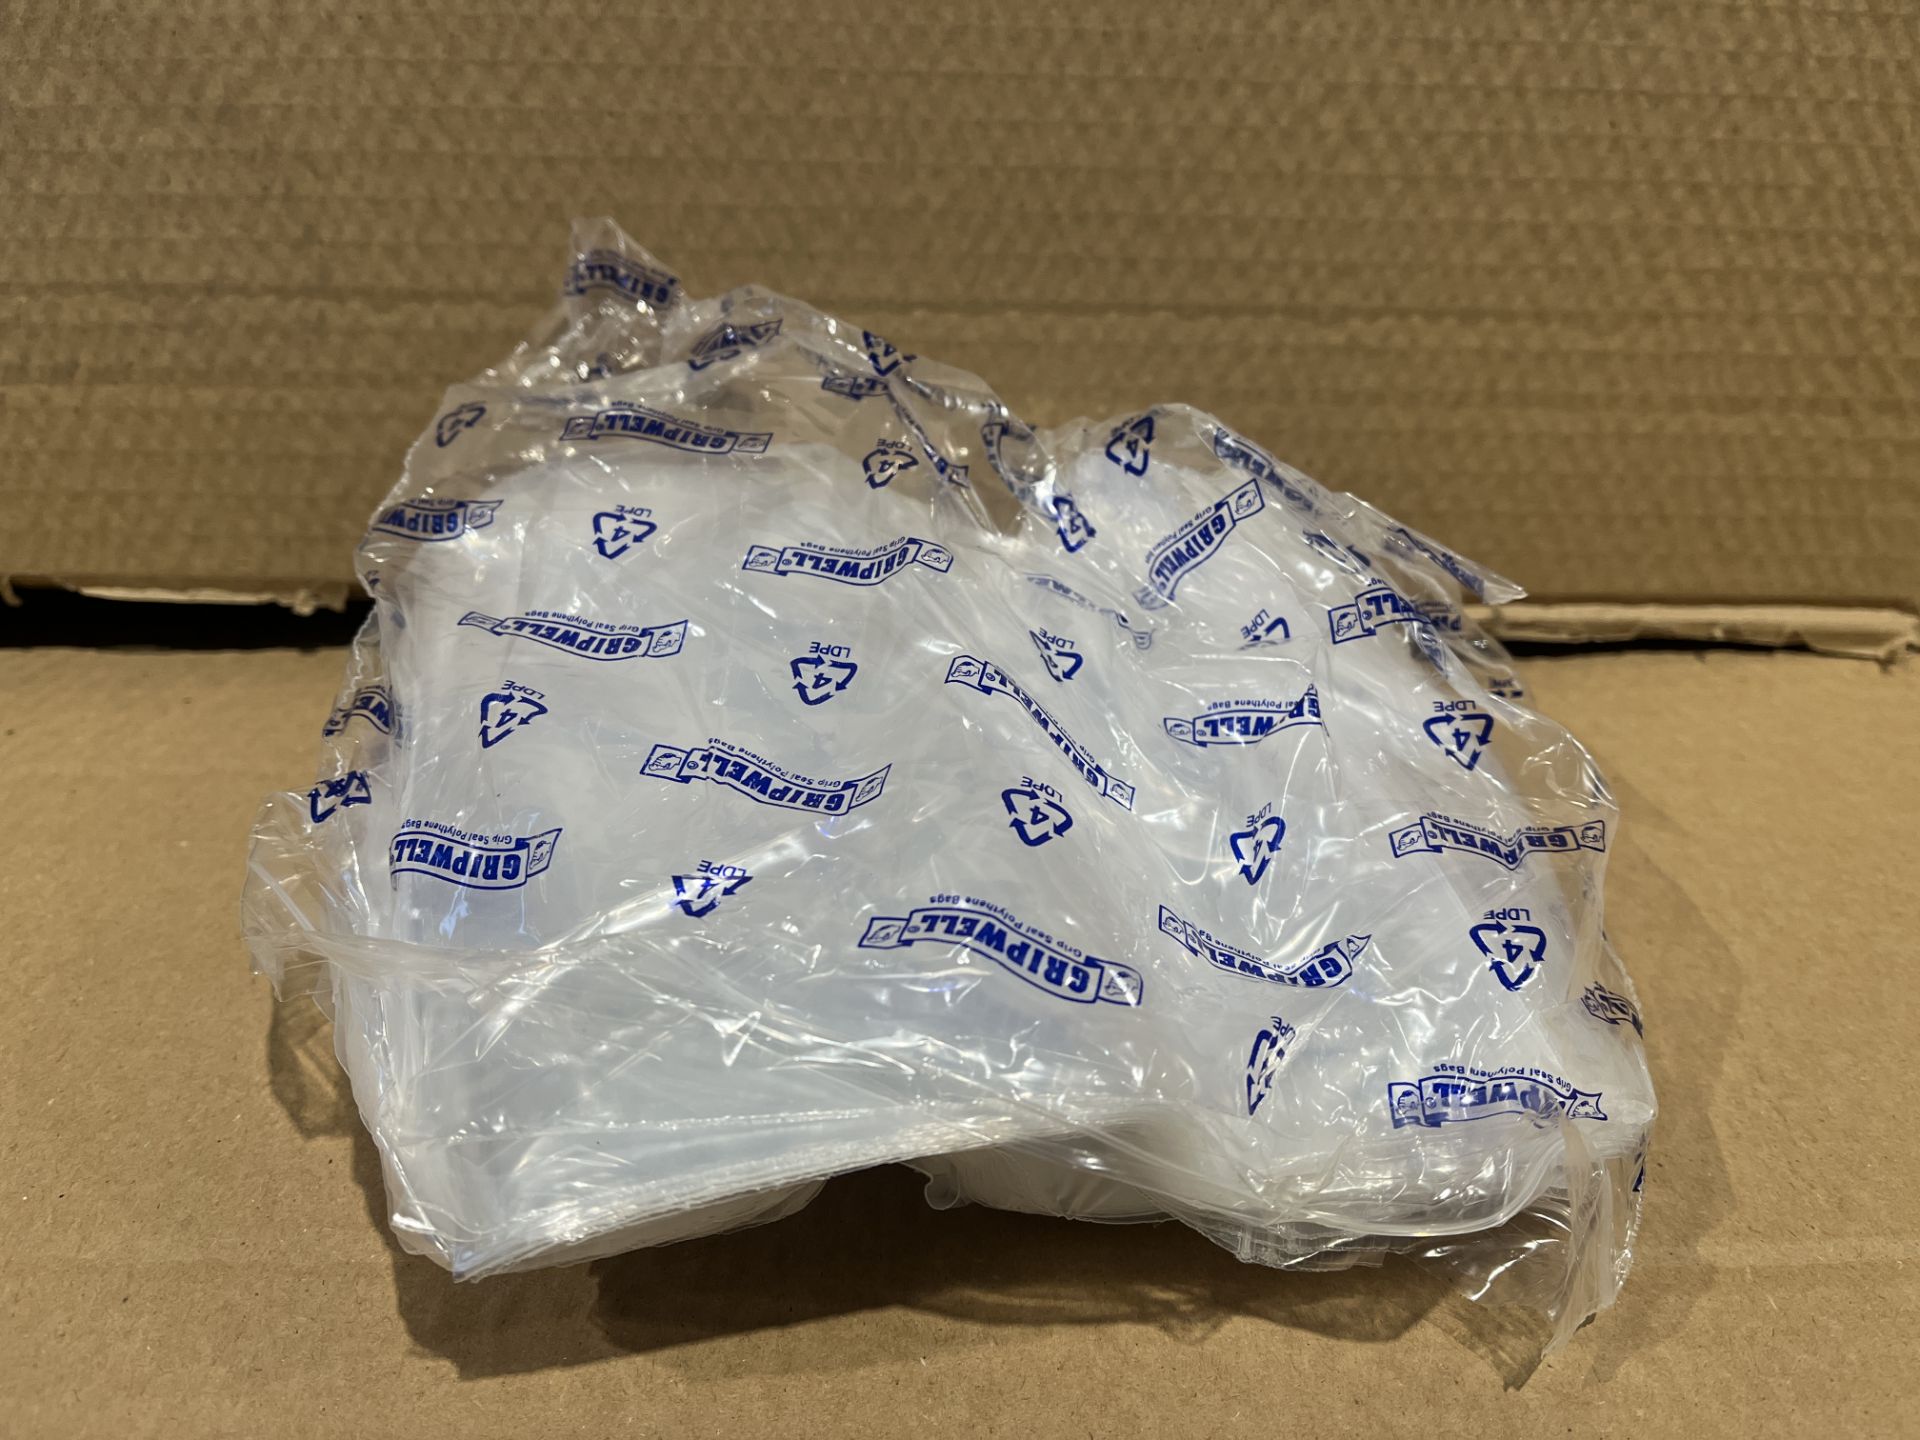 15 X BRAND NEW PACKS OF 1000 GRIP SEAL BAGS 5.5 X 5.5 INCHES S1P